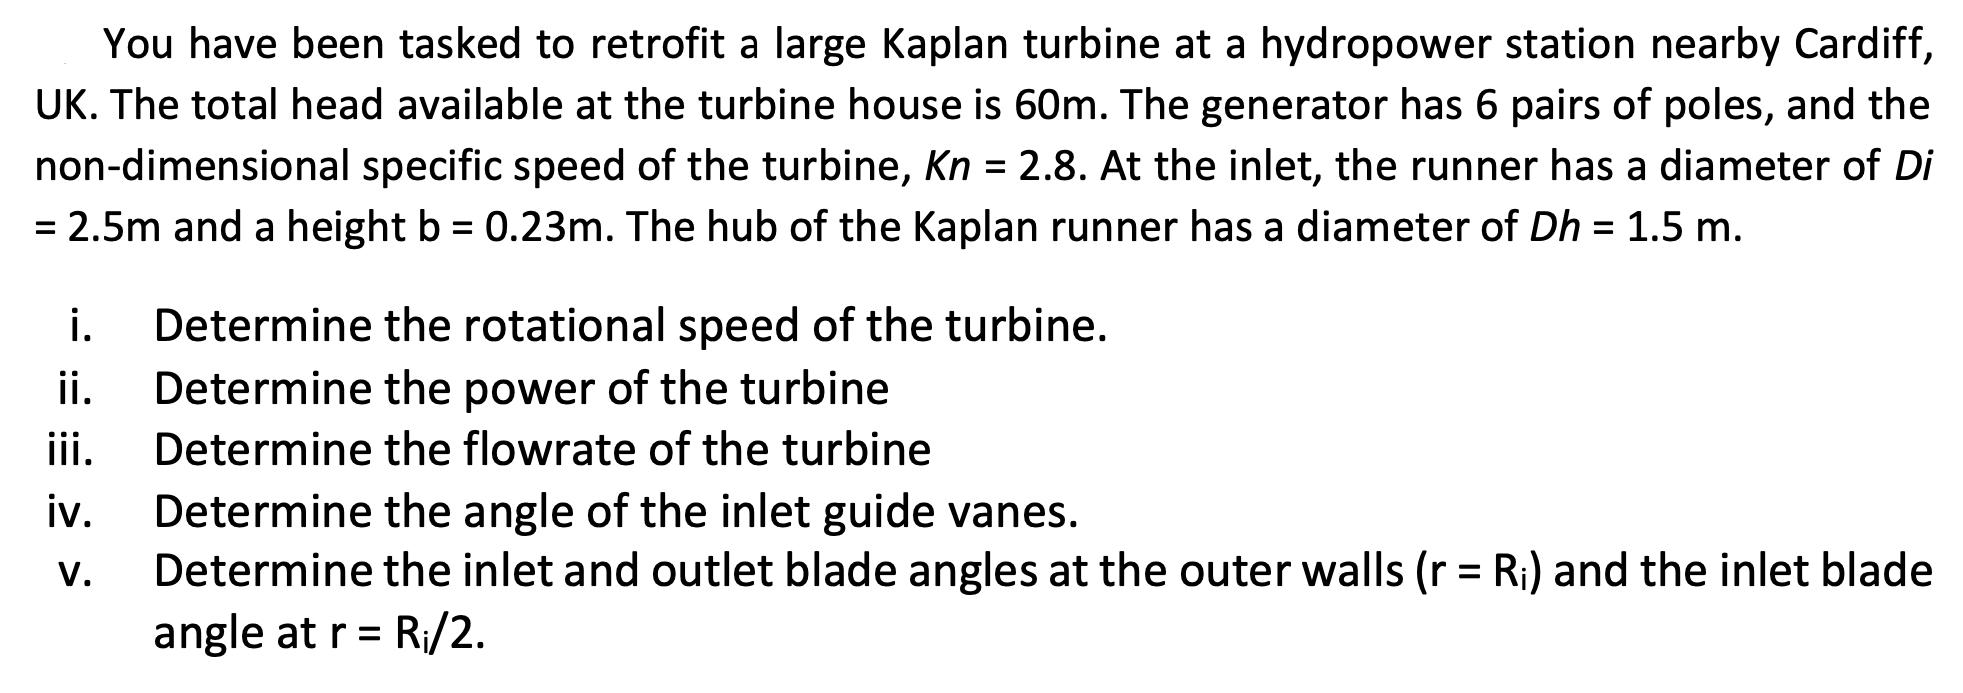 You have been tasked to retrofit a large Kaplan turbine at a hydropower station nearby Cardiff, UK. The total